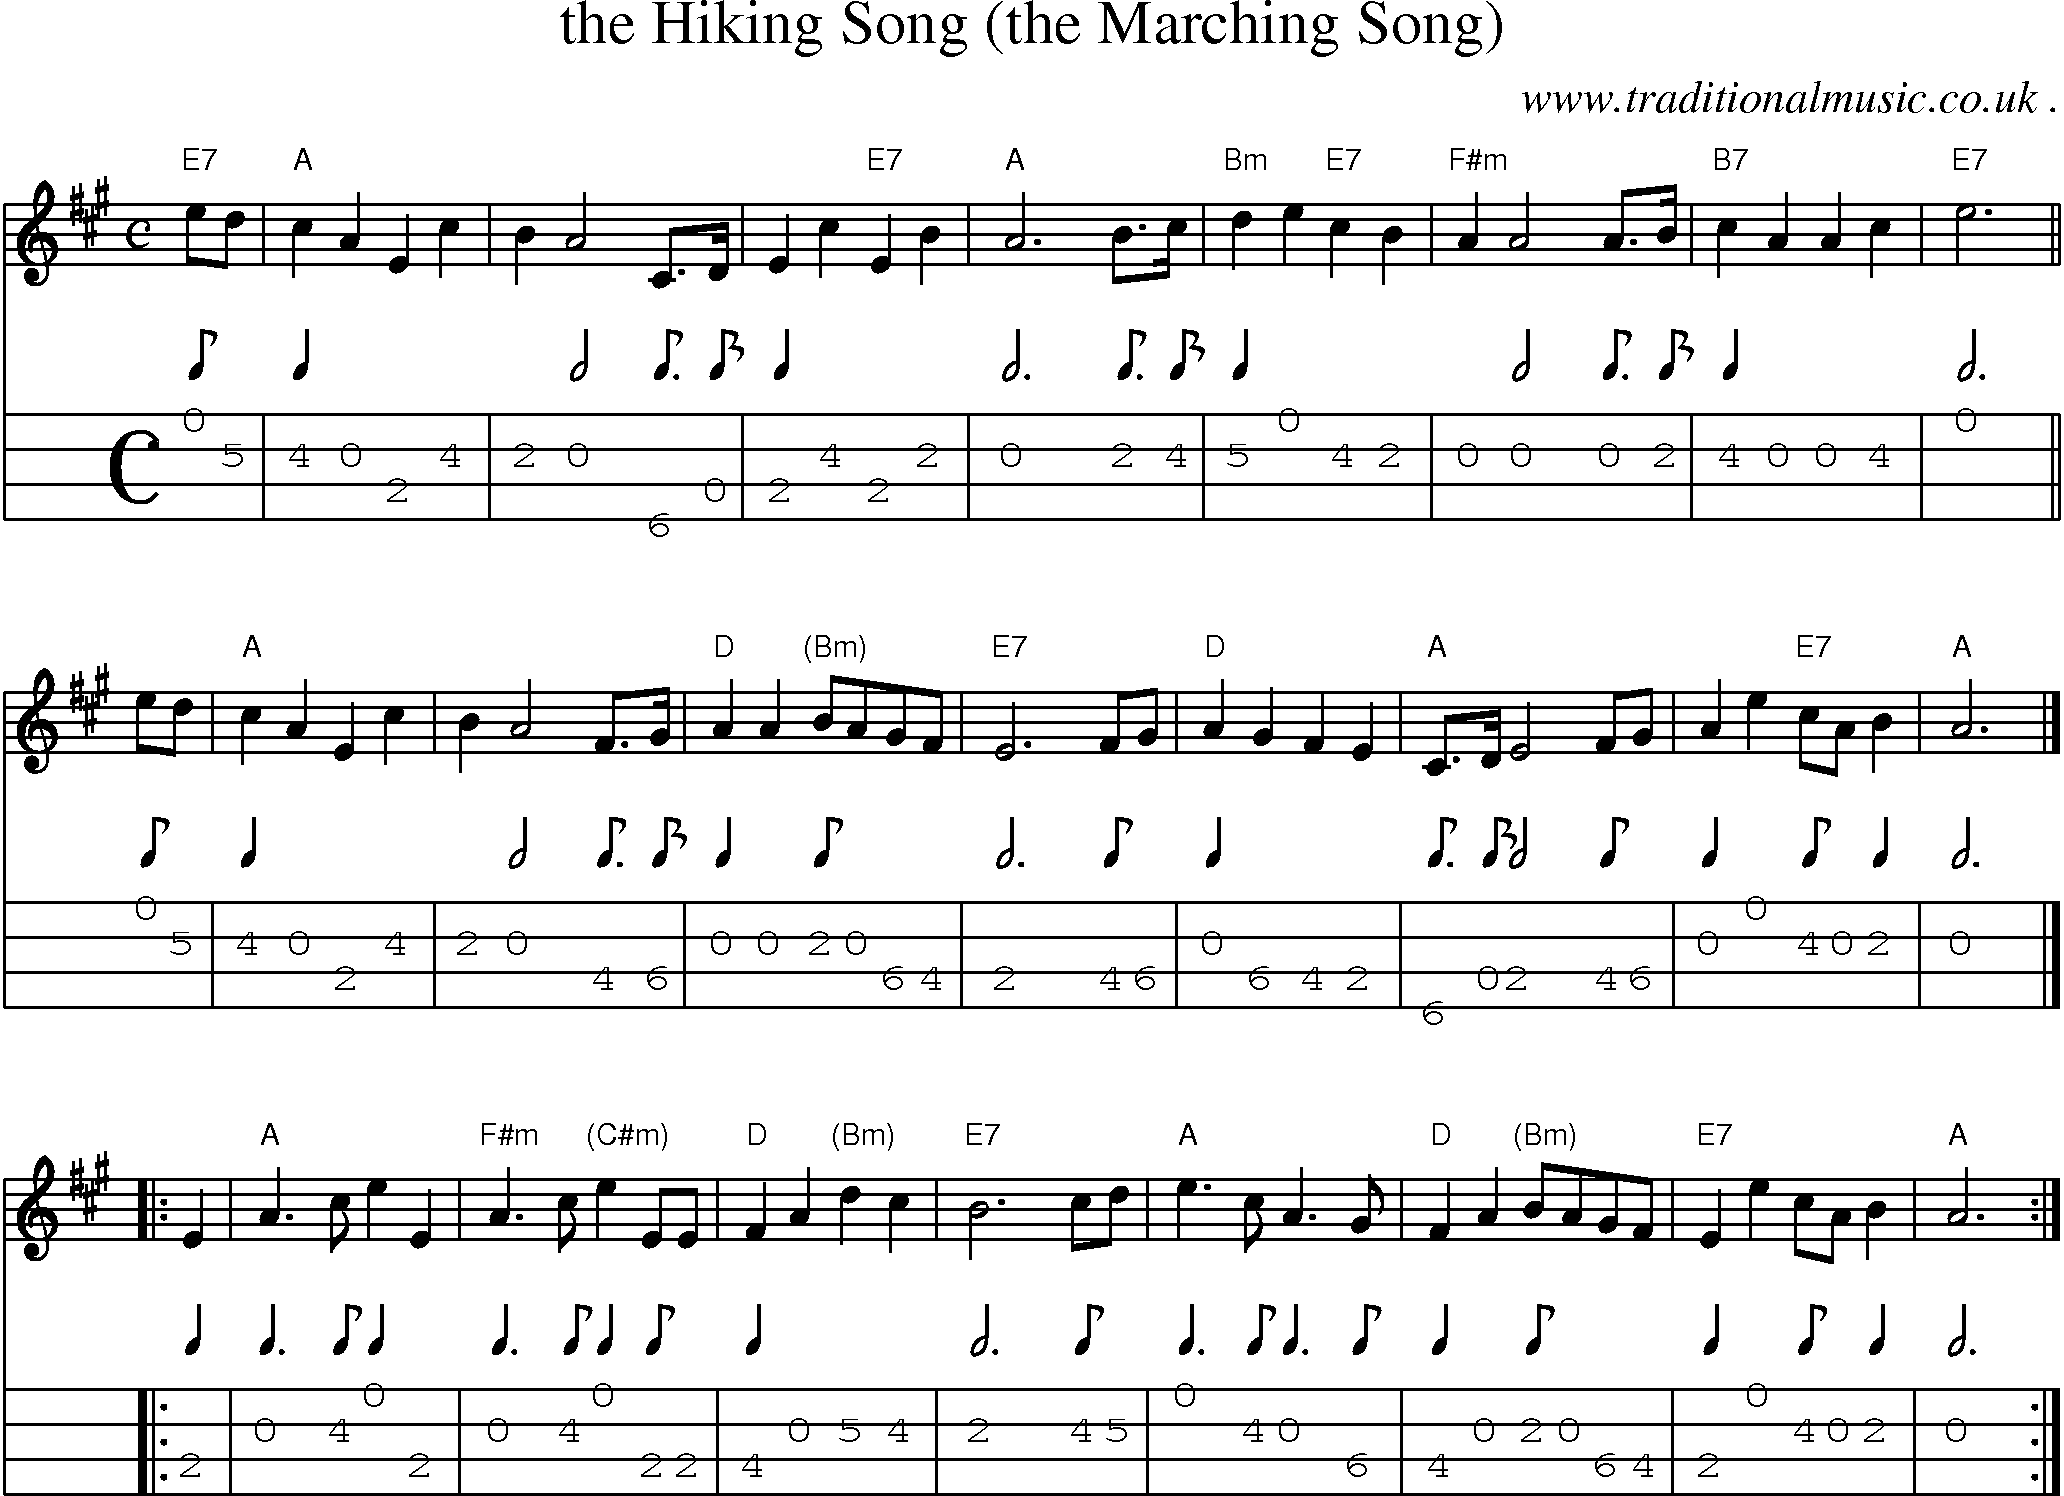 Sheet-music  score, Chords and Mandolin Tabs for The Hiking Song The Marching Song